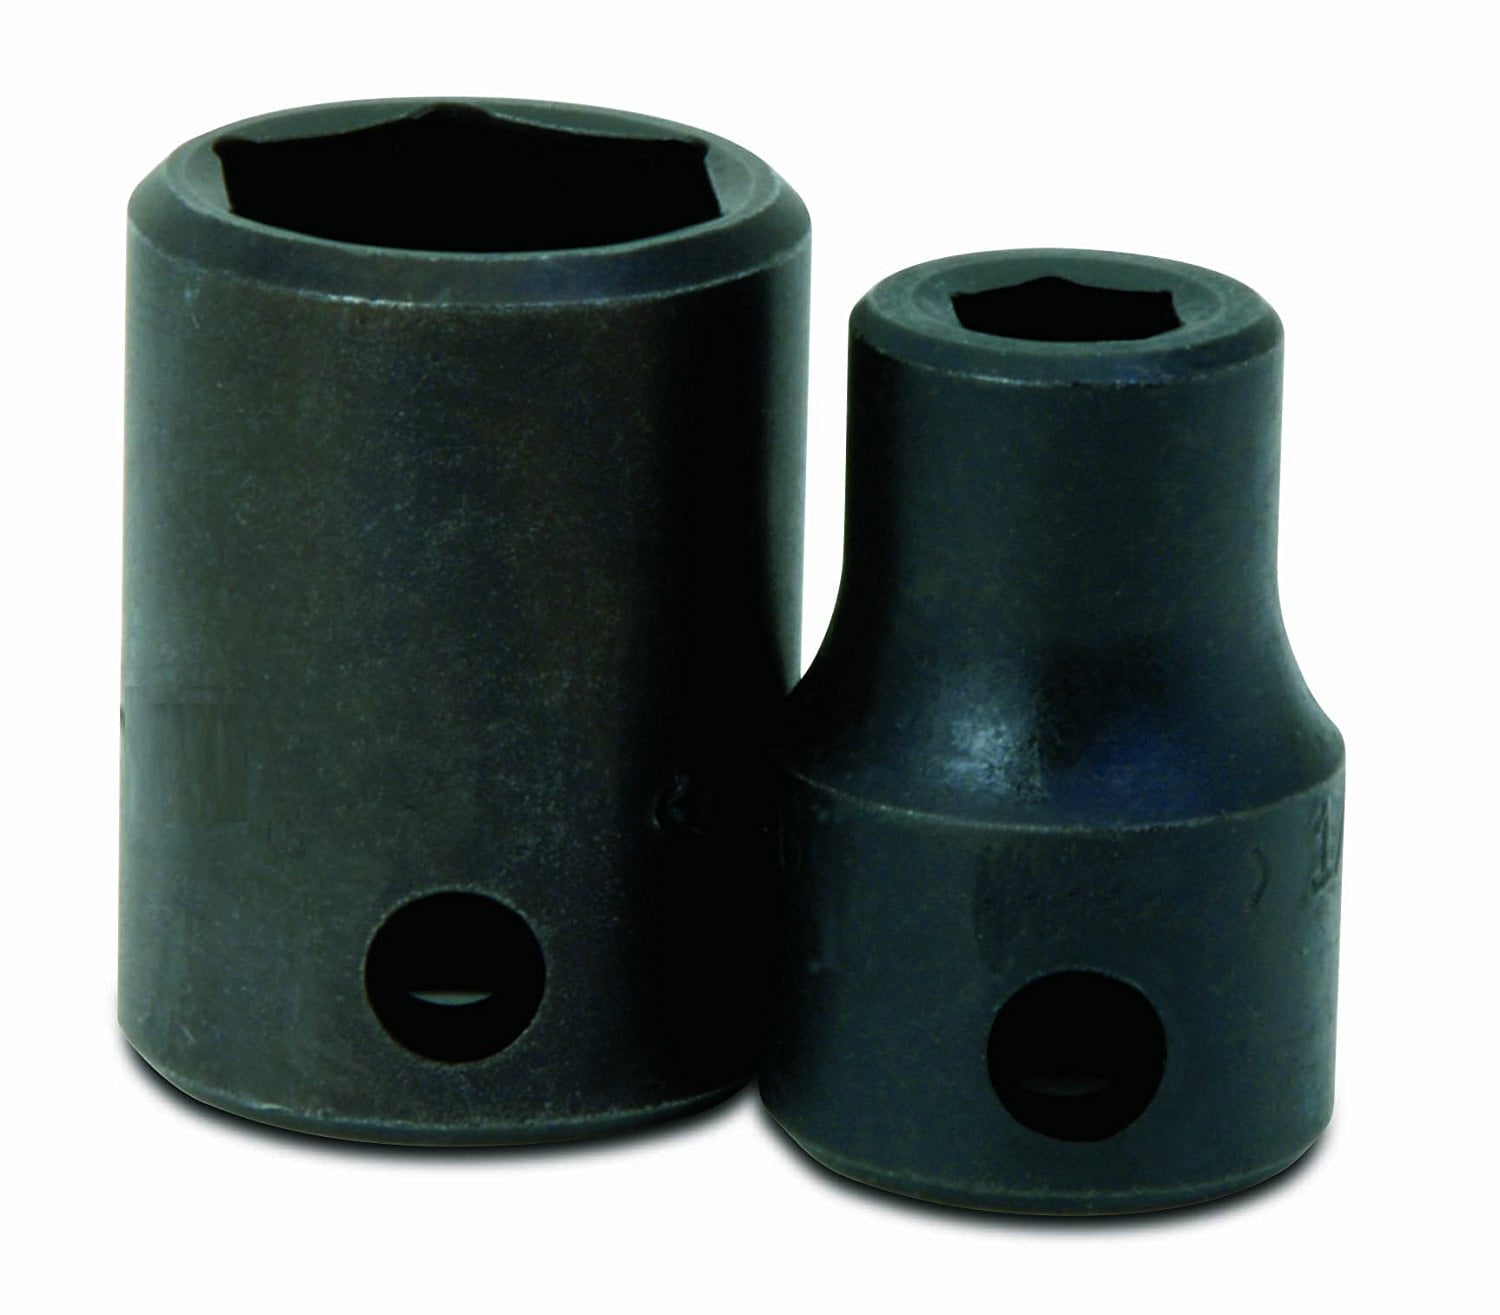 As sold by Snap On Blue Point 1/2" Deep Impact Sockets 10mm-32mm